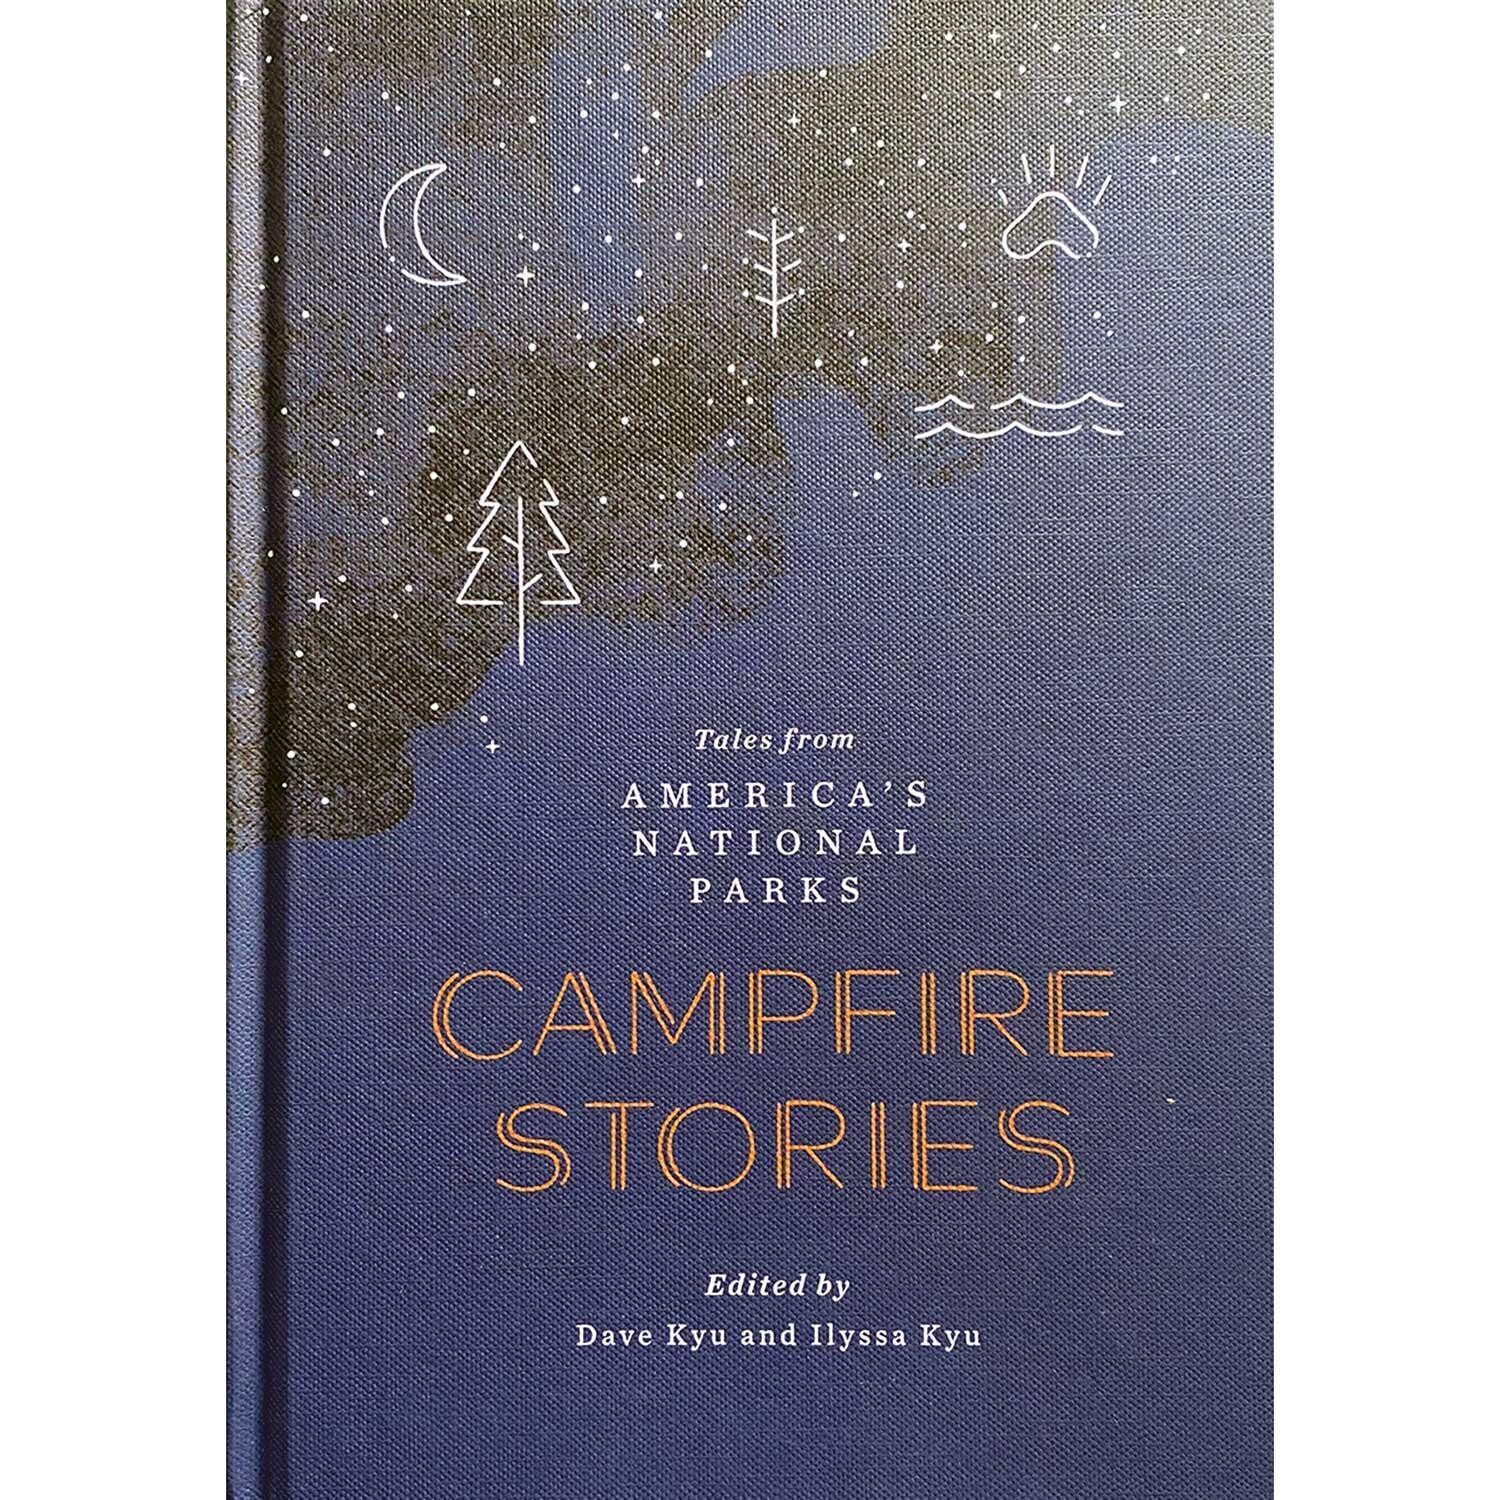 Campfire Stories: Tales from America's National Parks by Dave and Ilyssa Kyu